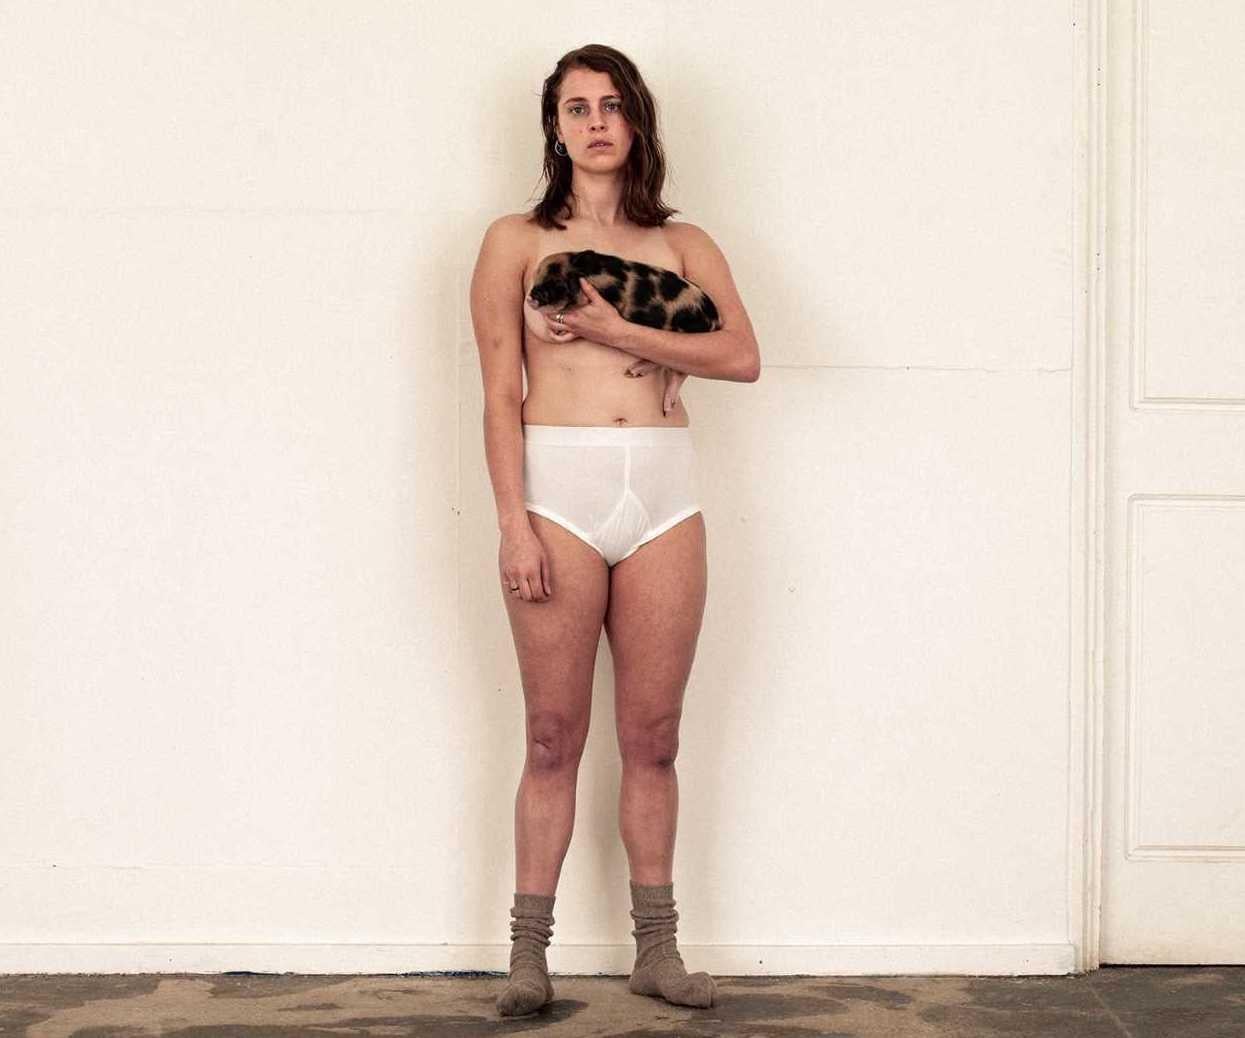 Michelle Obama Porn Fucking - Marika Hackman review, Any Human Friend: Blunt and bold album has a dark  sexual energy | The Independent | The Independent